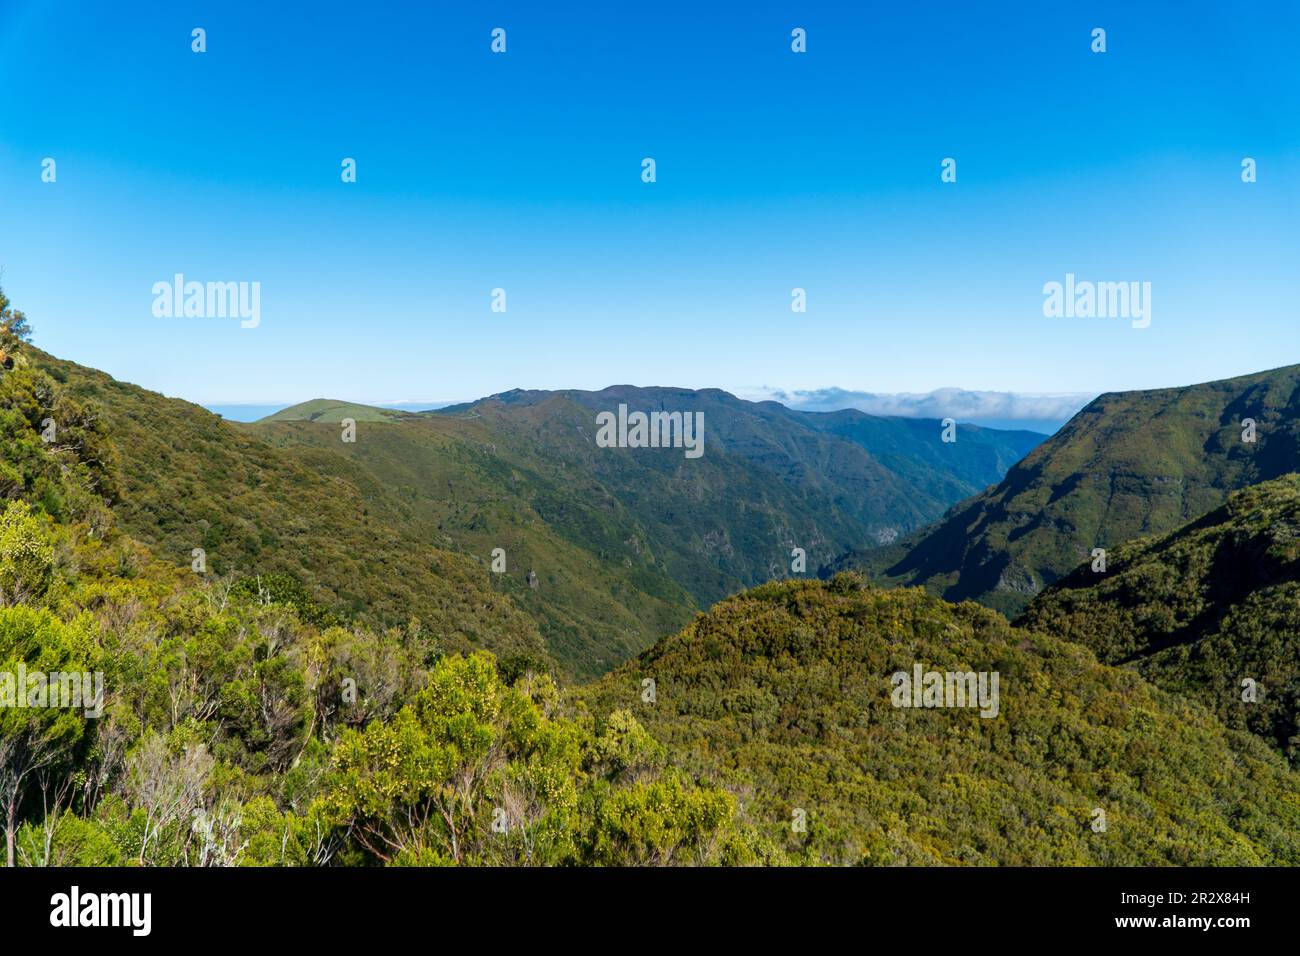 Mountain landscape. View of mountains on the route Queimadas Forestry Park - Caldeirao Verde. Madeira Island, Portugal, Europe. Stock Photo